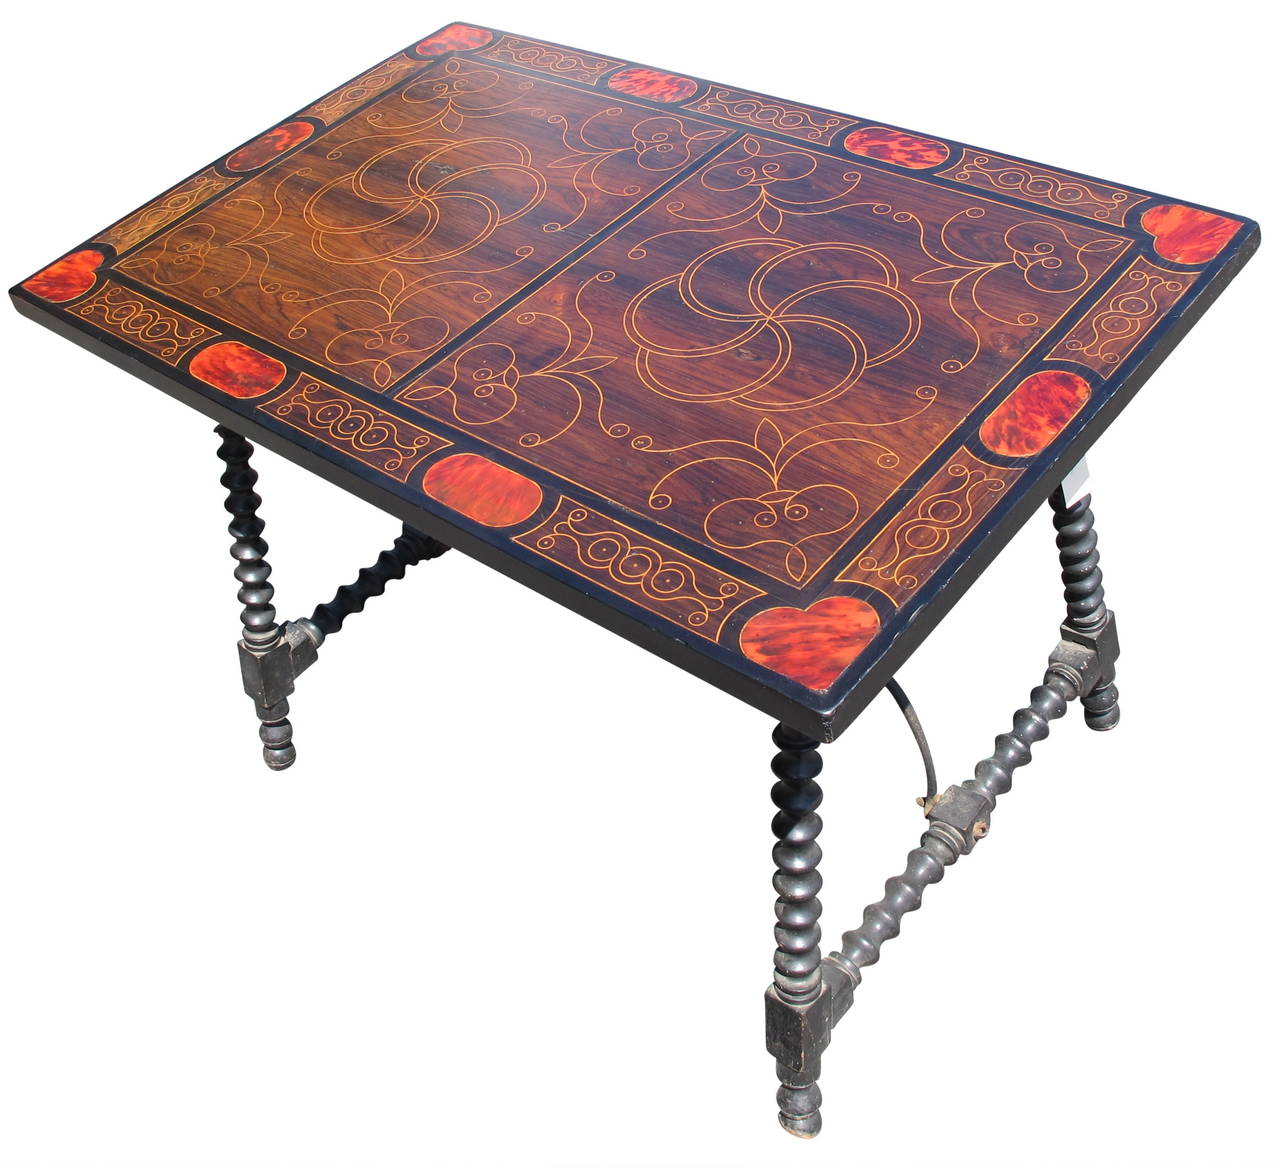 Beautiful inlay work throughout this rare Spanish table. Ebonized turned legs and wrought iron stretcher.